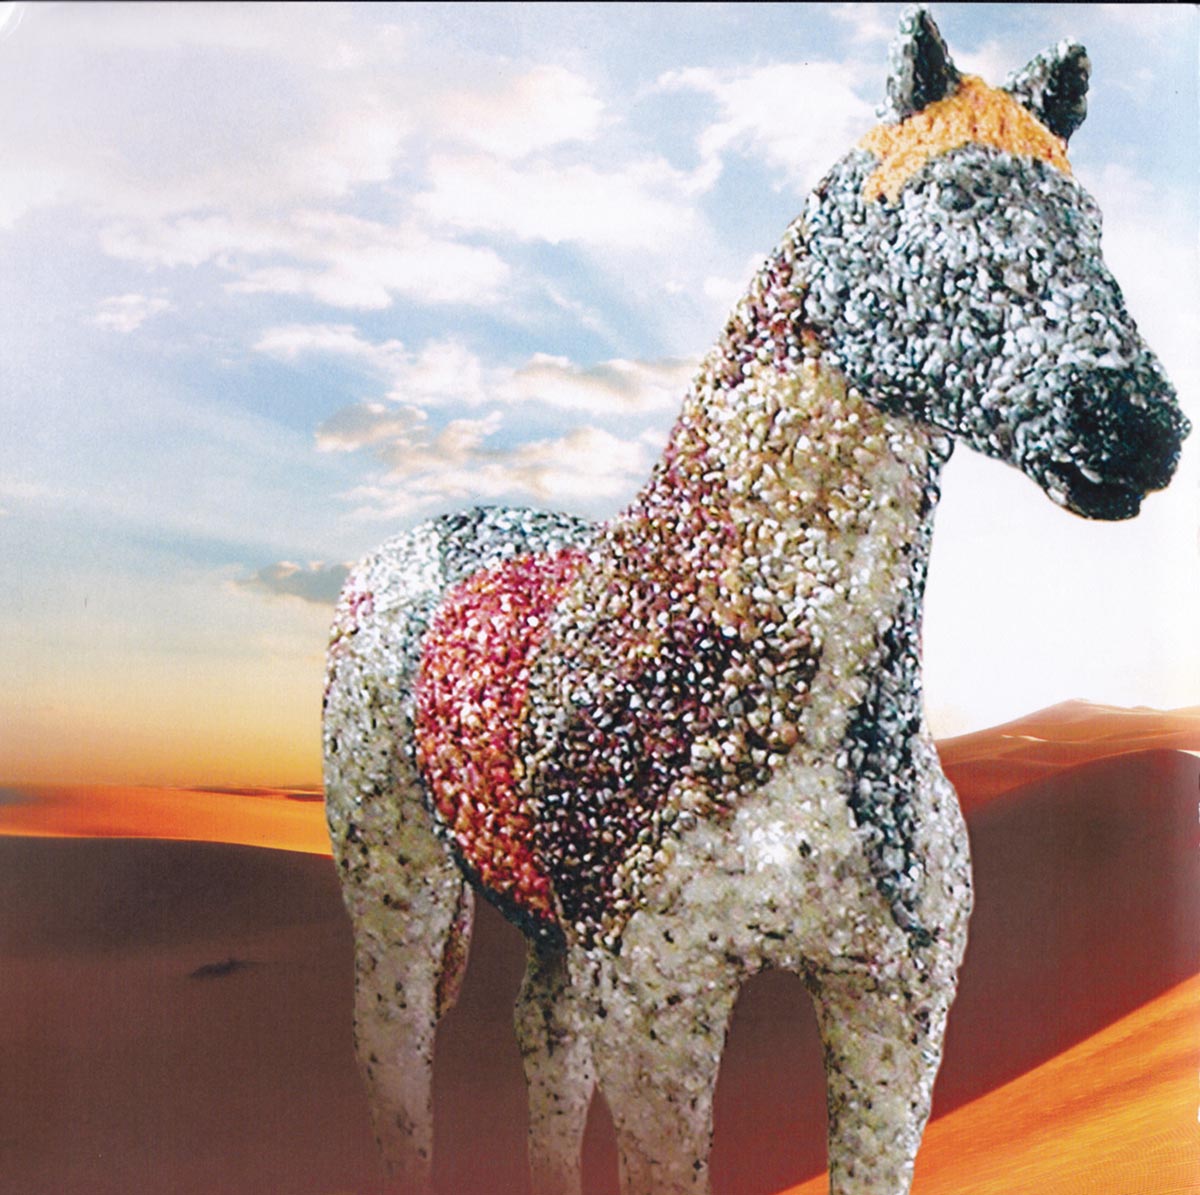 The Jewelled horse